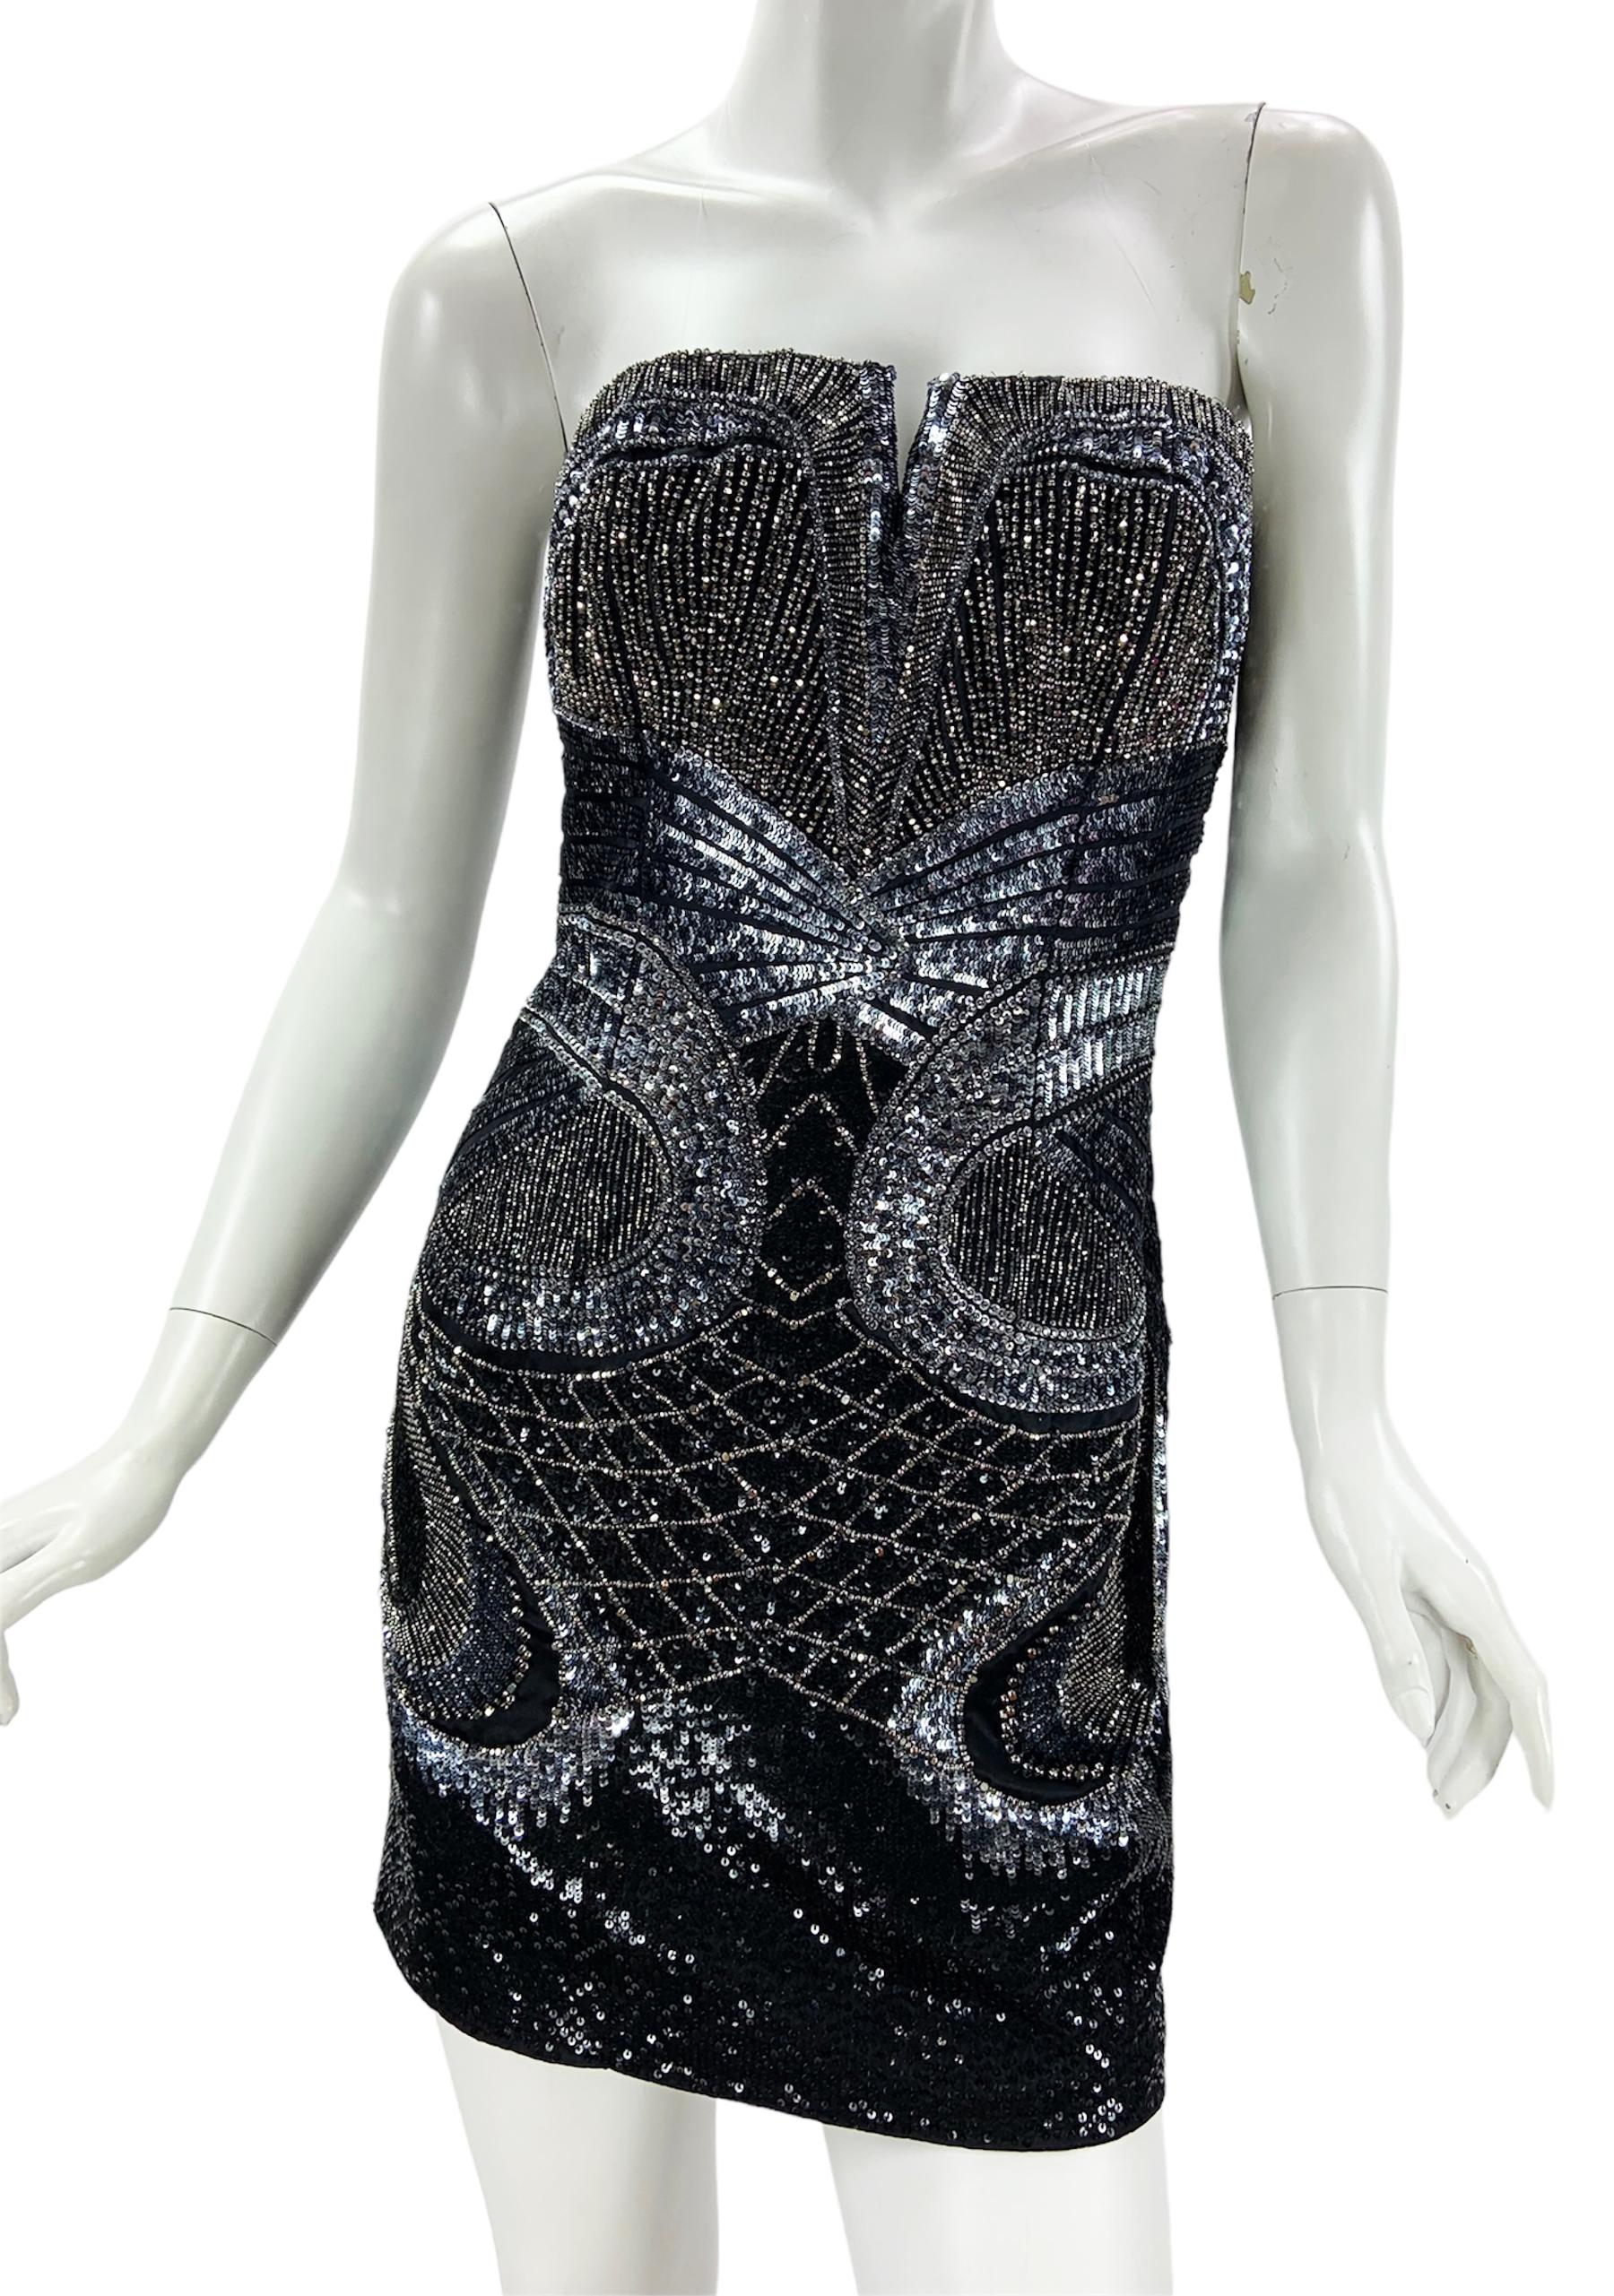 NWT Roberto Cavalli Butterfly Beaded Mini Dress
As Seen on Shakira on the Red Carpet and Lea Michele on the cover of Marie Claire in gold version.
Italian size 44 - Please check measurements.
Butterfly pattern created from black and silver sequins,